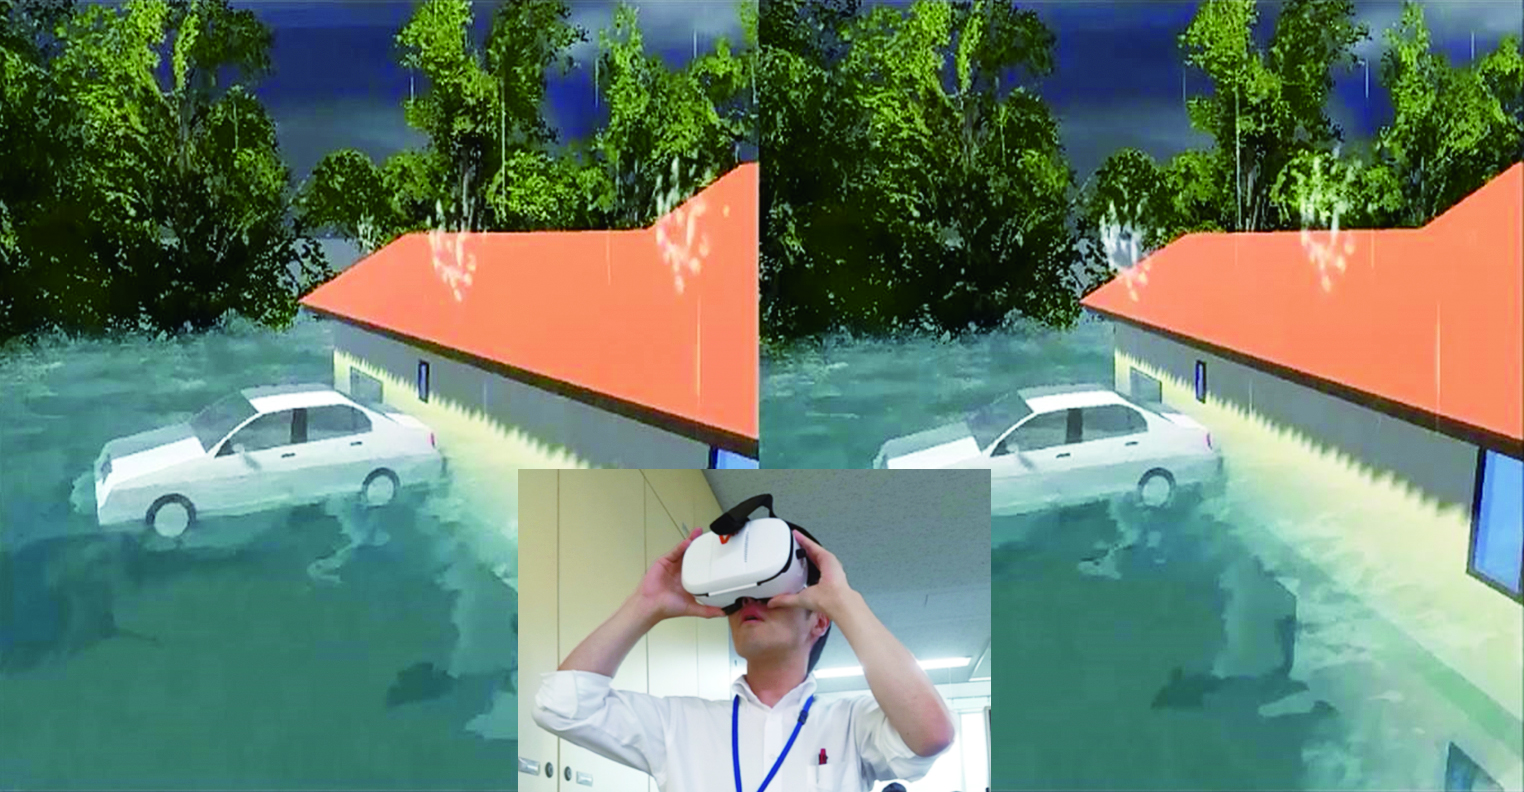 Observation of flood event using virtual reality (VR)